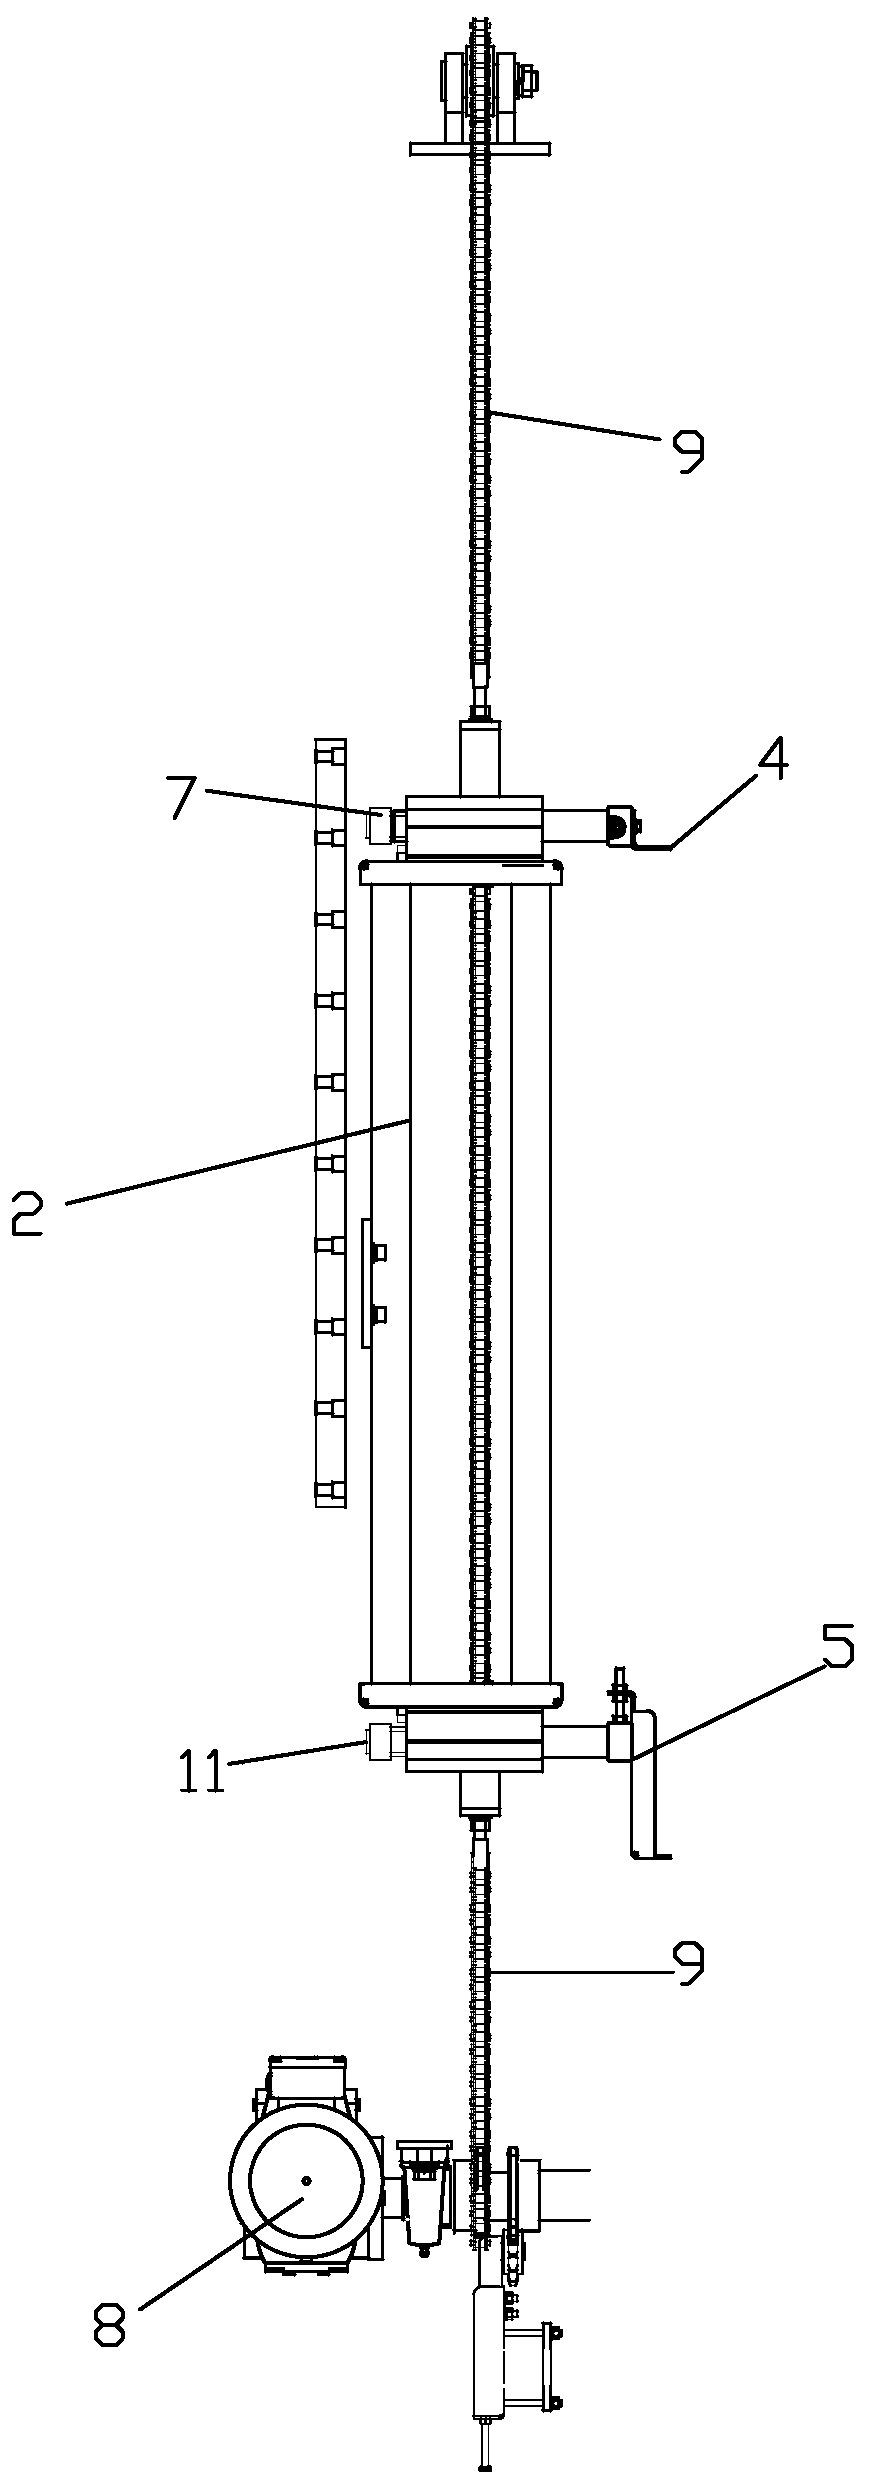 One-by-one frame body splitting method suitable for industrialized rearing